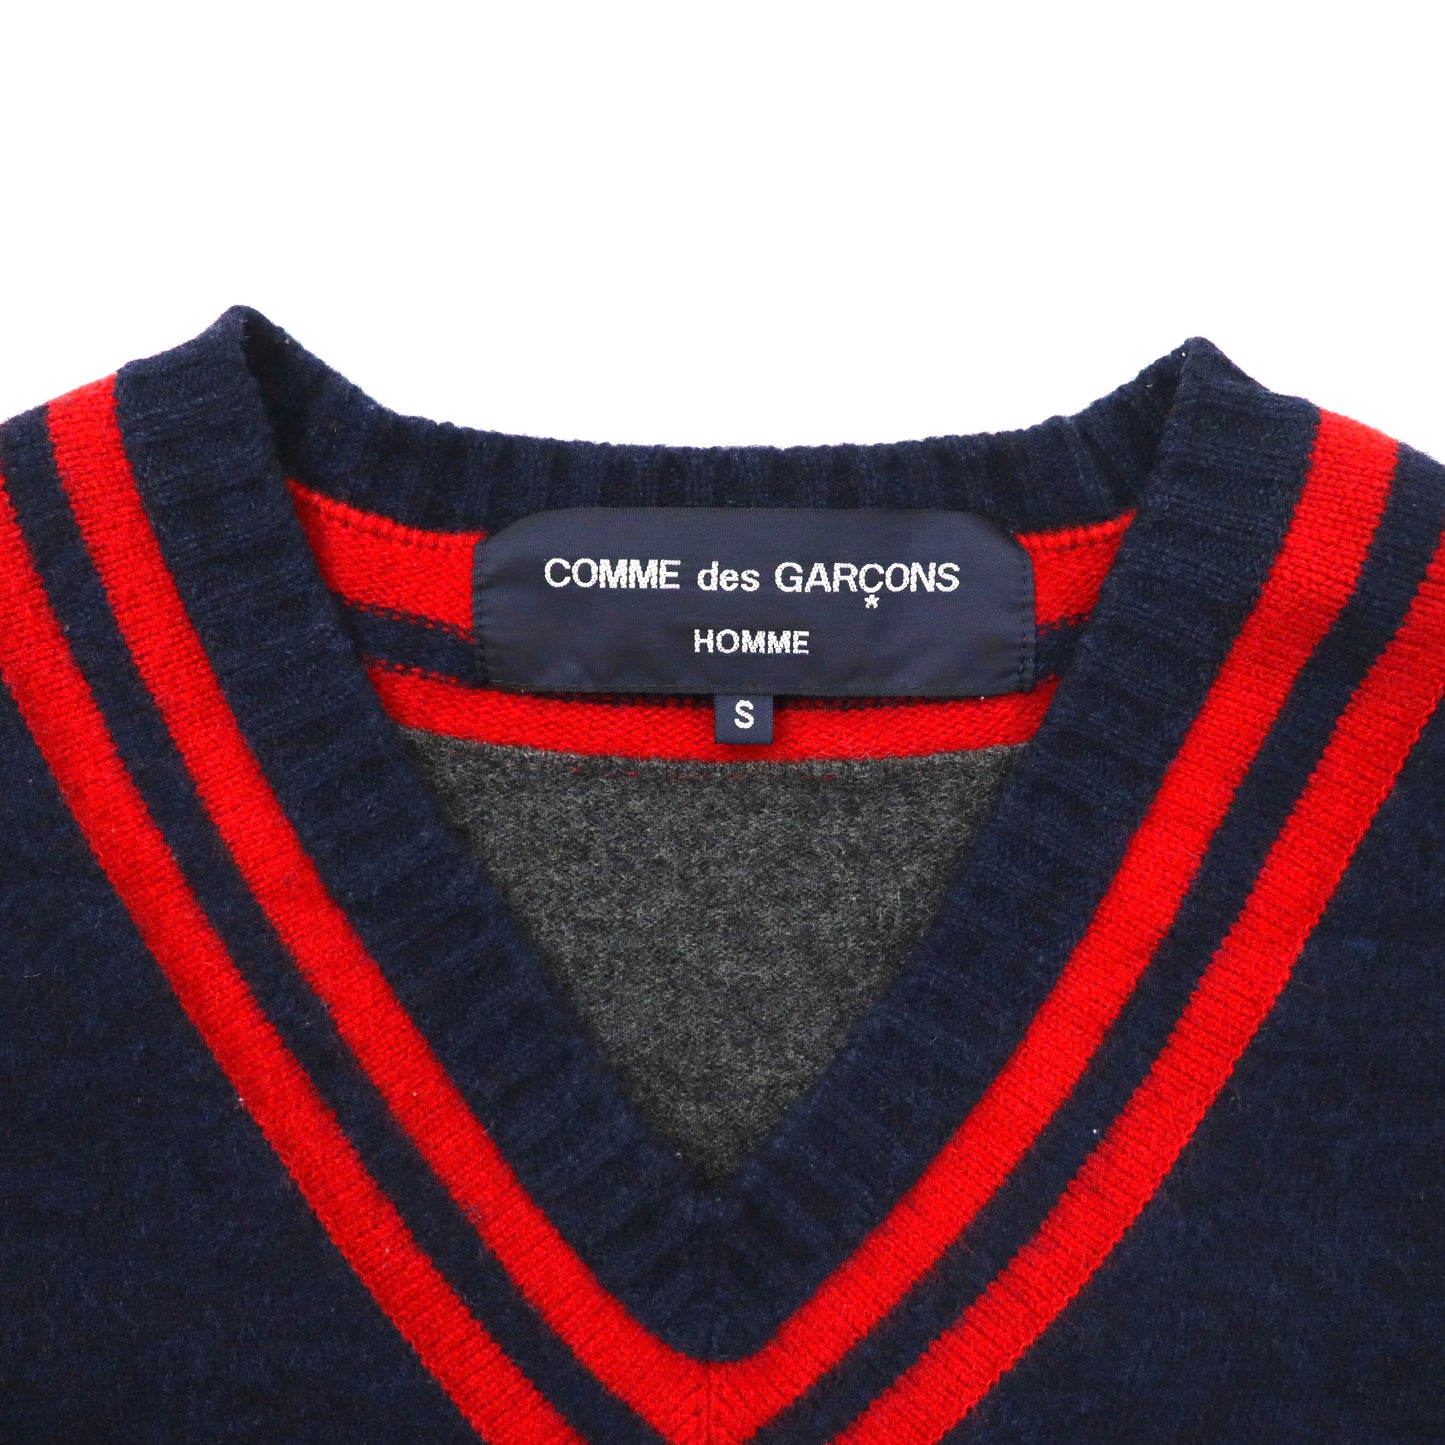 COMME des GARCONS HOMME Knit V-Neck Sweater S Navy Wool HH-N021